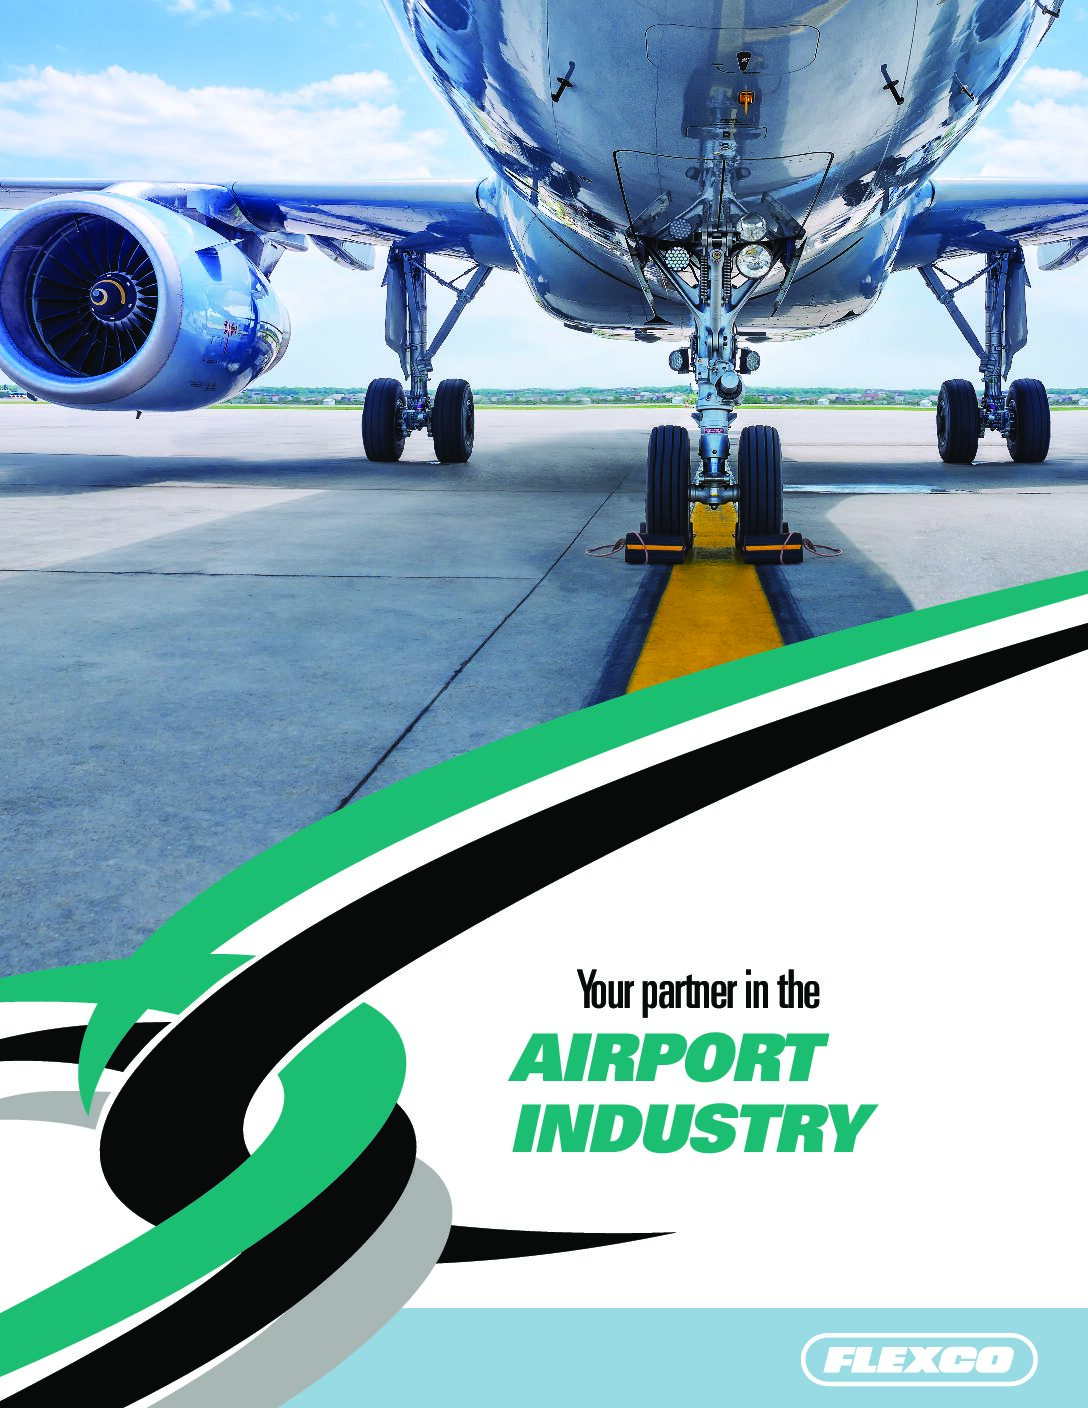 Flexco: Your Partner in the Airport Industry